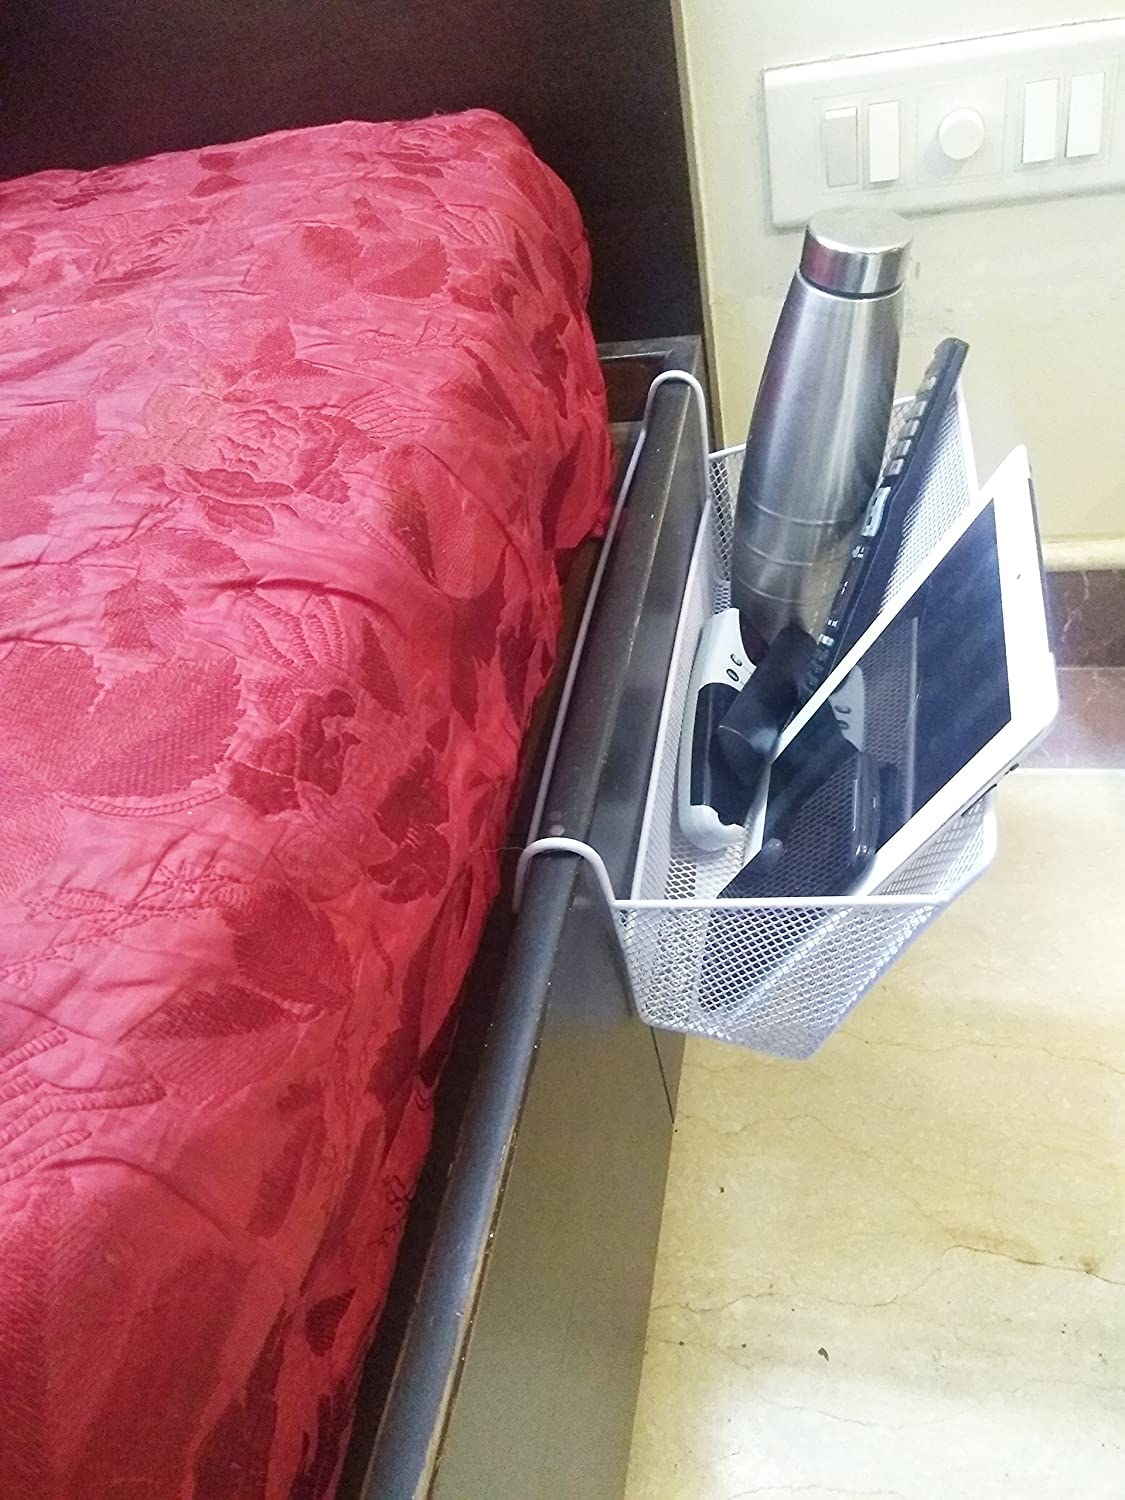 A bedside caddy with electronics in it 